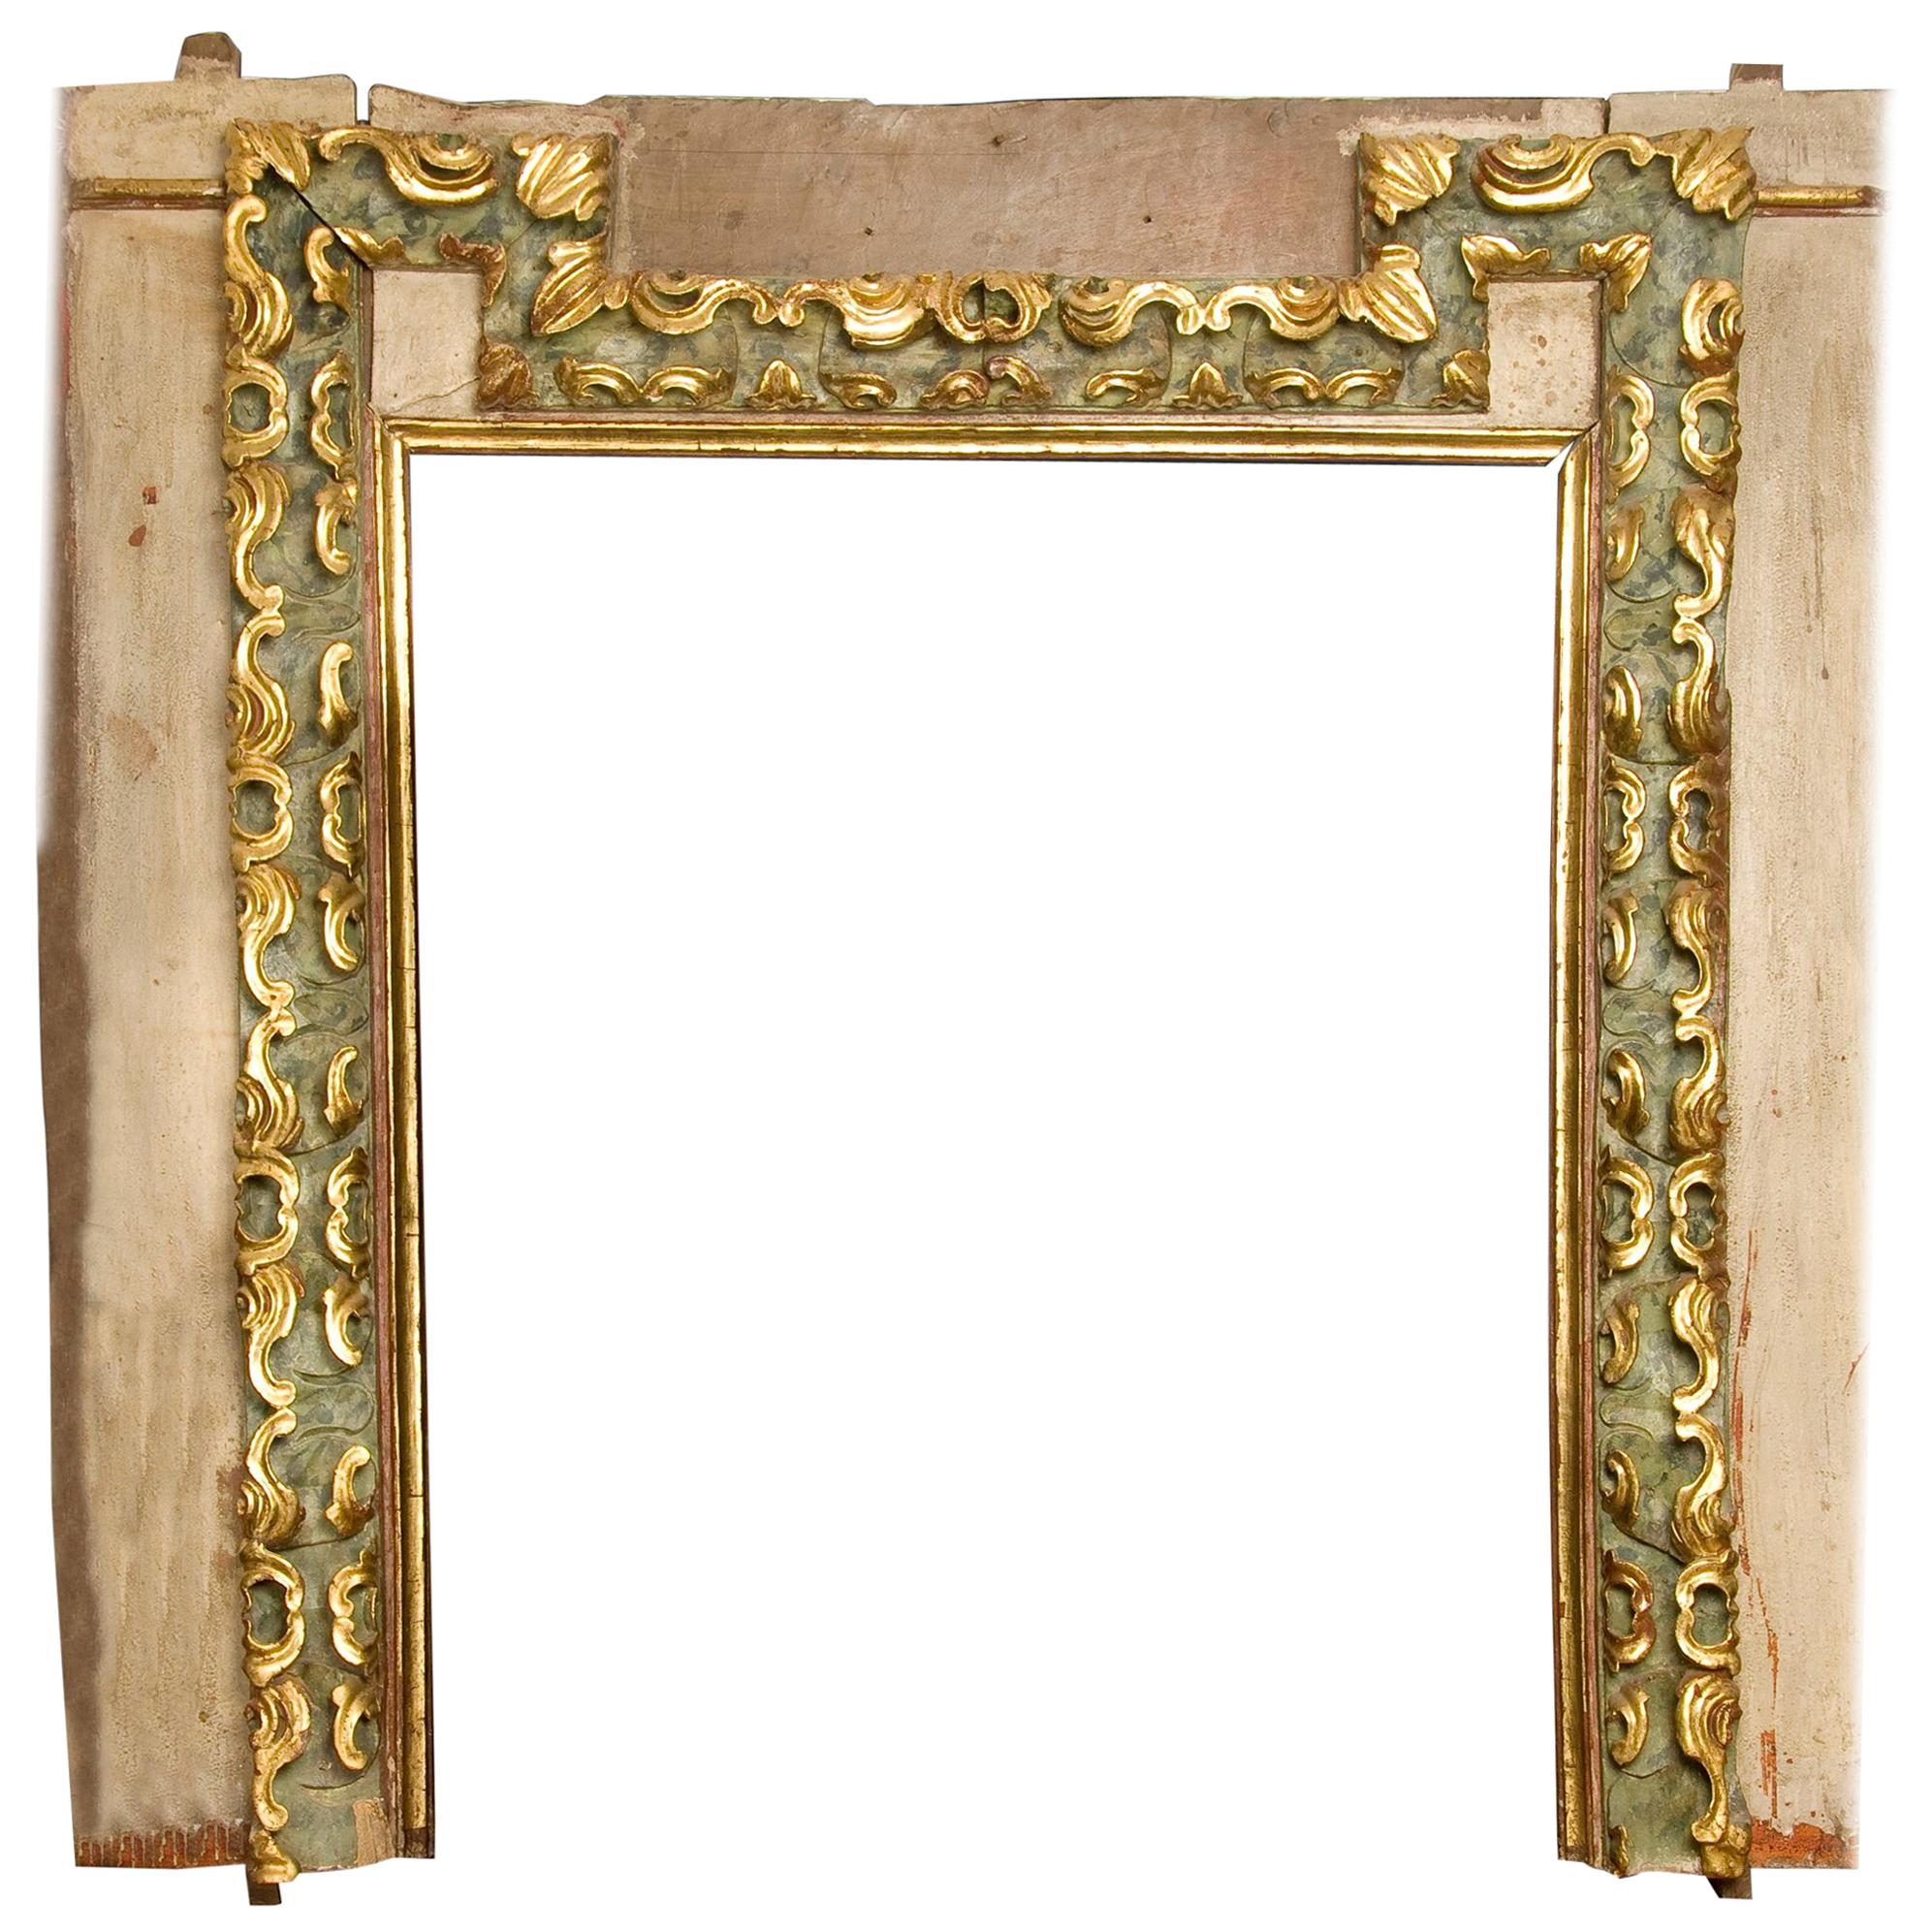 Set of Lintel and Two Jambs, Polychromed Wood, Baroque, 17th Century